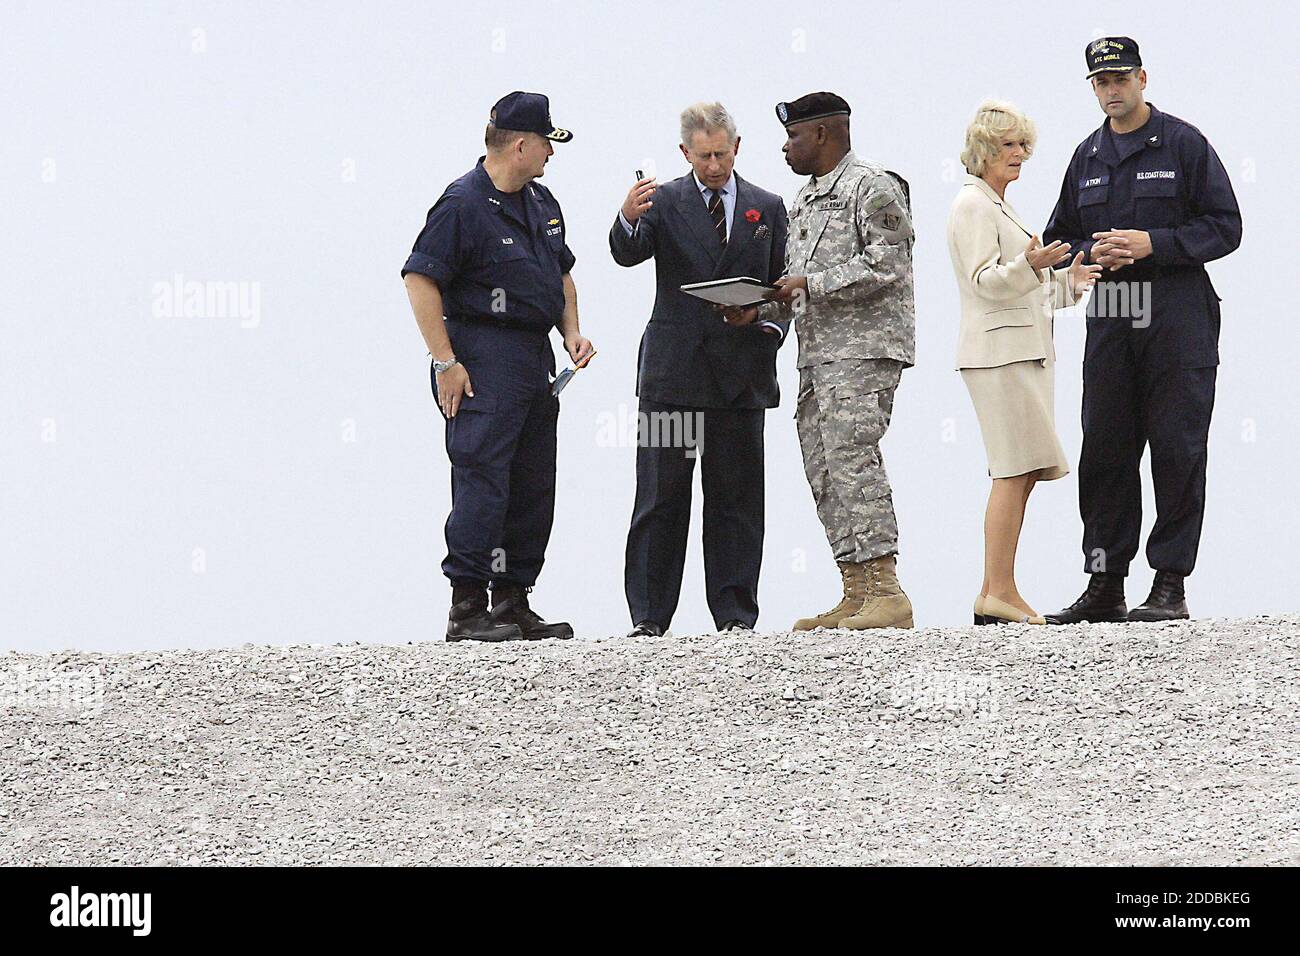 NO FILM, NO VIDEO, NO TV, NO DOCUMENTARY - Prince Charles and his wife, Camilla, Duchess of Cornwall, made a visit to the Lower 9th Ward in New Orleans, Louisiana, near the Industrial Canal levee on Friday, November 4, 2005, to see Hurricane Katrina's damage. Britain's Prince Charles talks with Coast Guard Vice Admiral Thad Allen, left, and Brig. Gen. Robert Crear, as his wife Camilla, Duchess of Cornwall, speaks with United States Coast Guard Captain Tom Atkin atop the Industrial Canal levee. Photo by Chris Oberholts/Kansas City Star/KRT/ABACAPRESS.COM Stock Photo